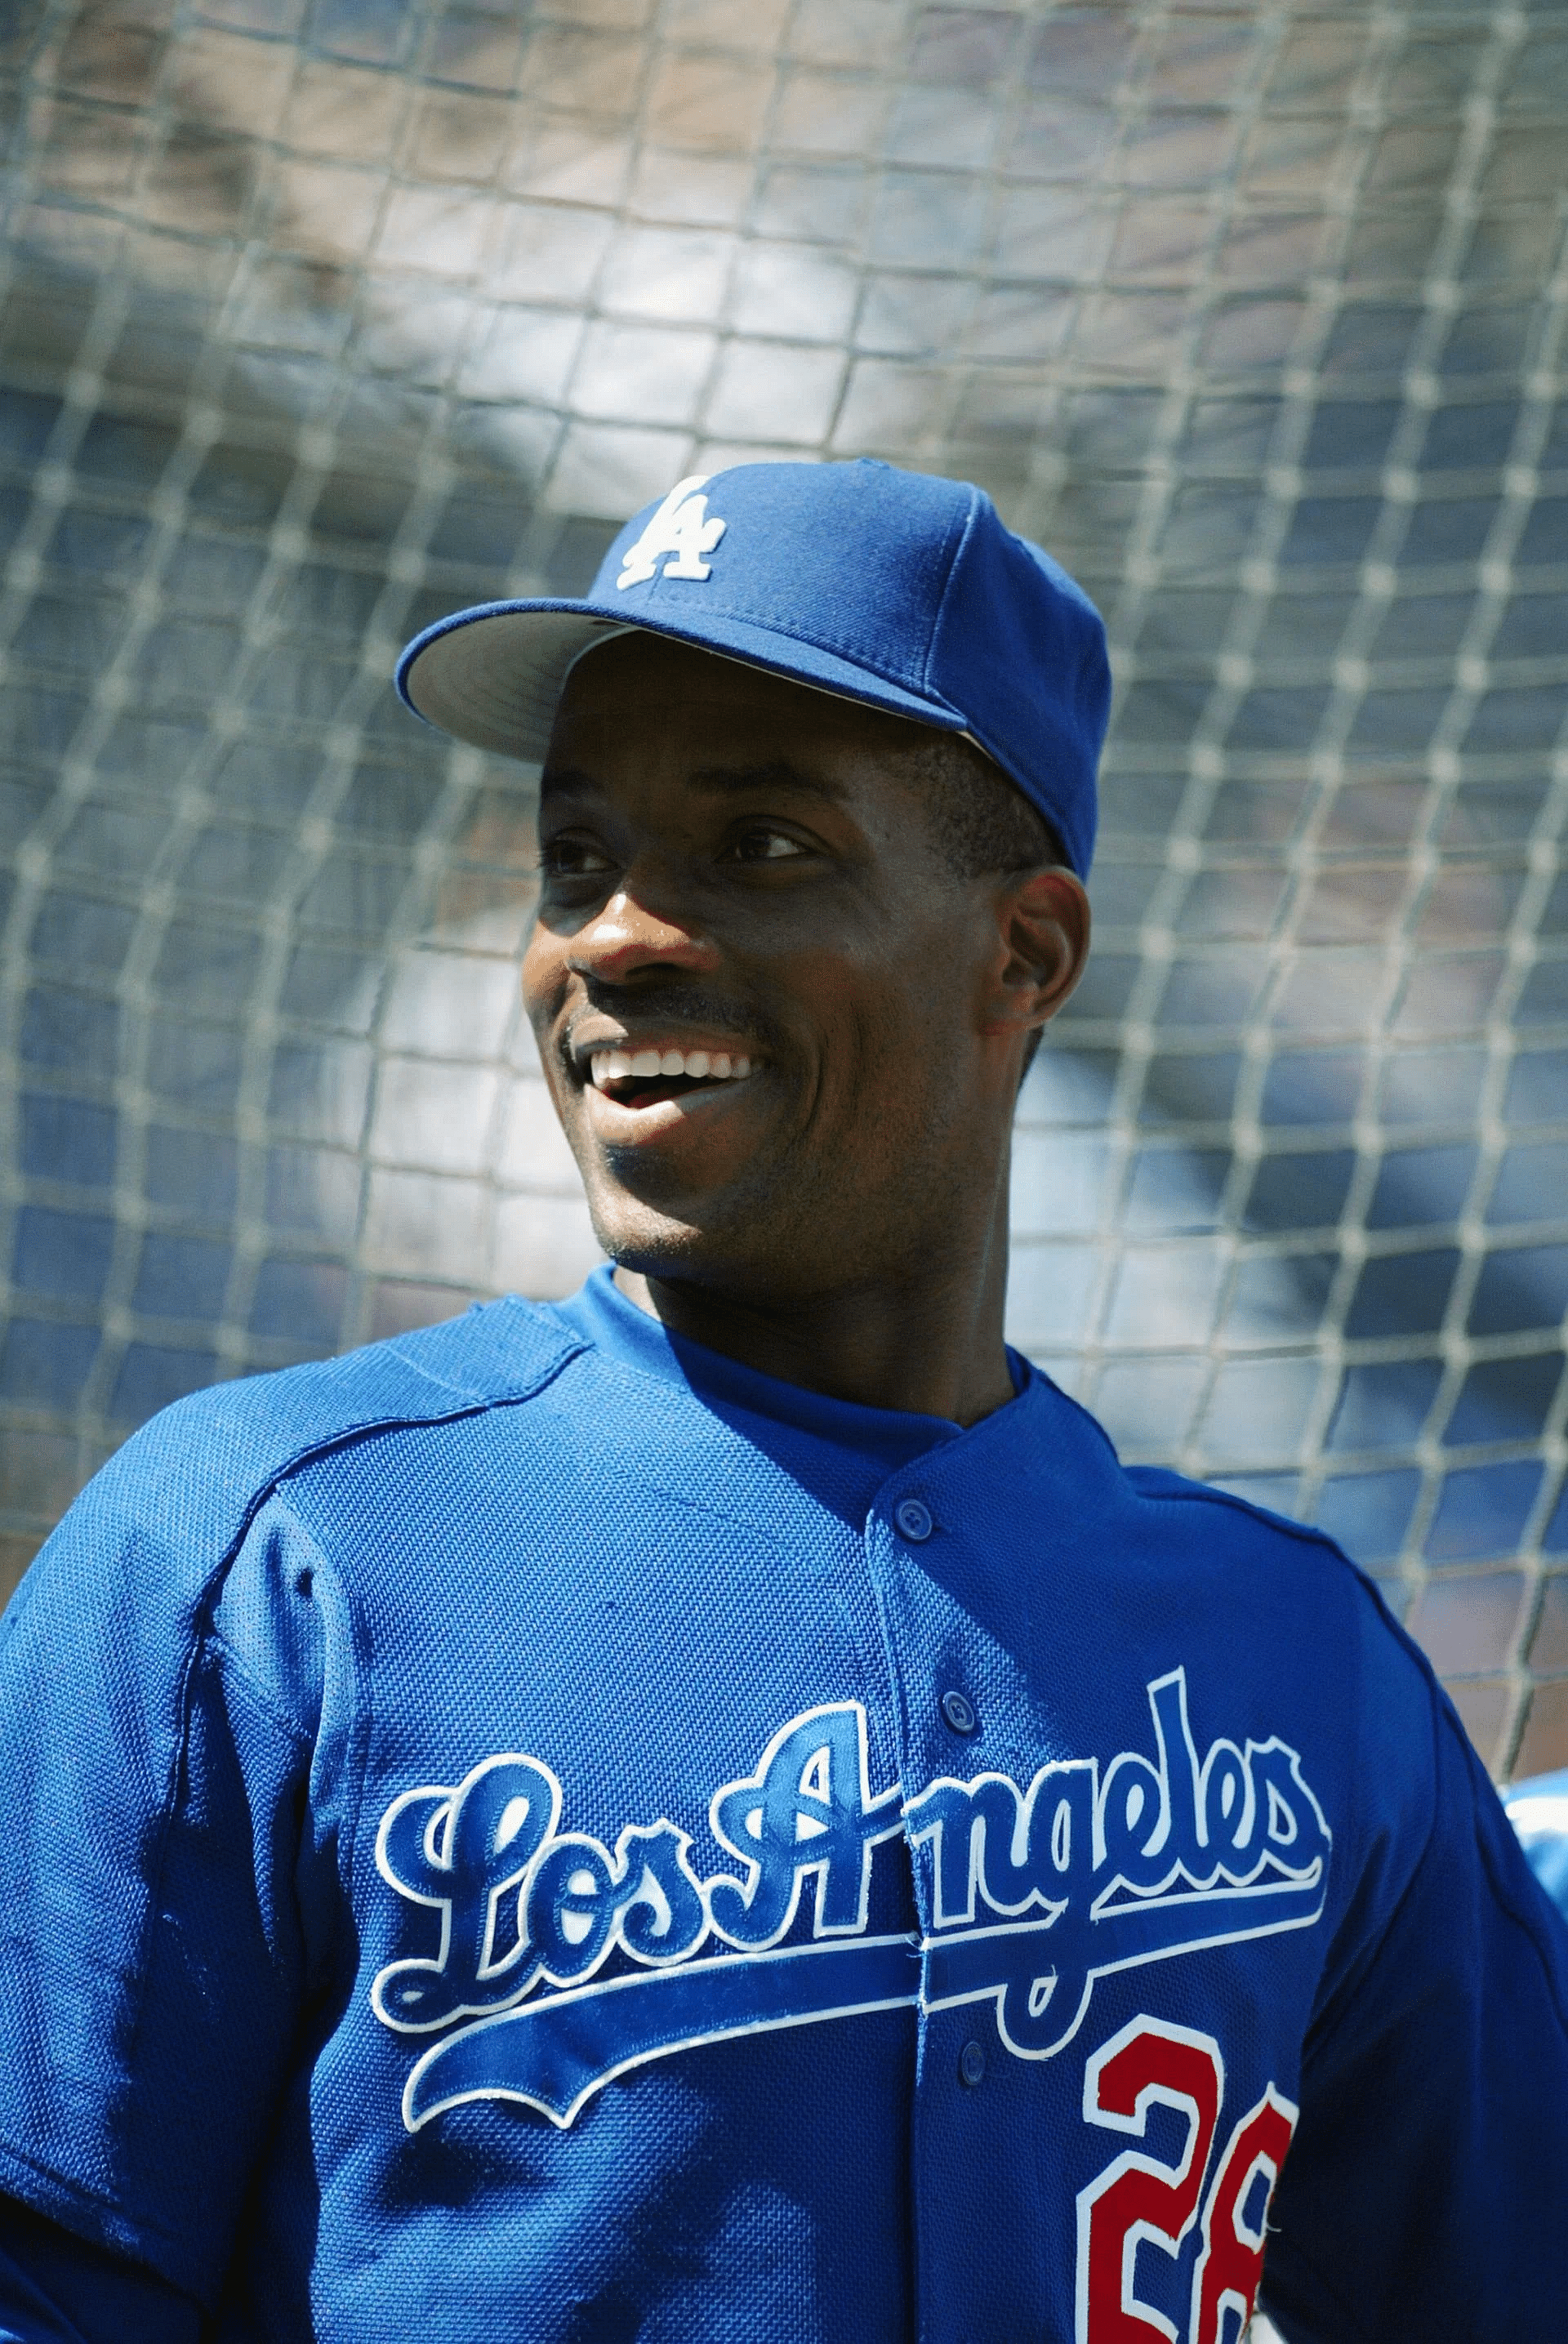 Fred McGriff Unanimously Elected to BBHoF – All Otsego